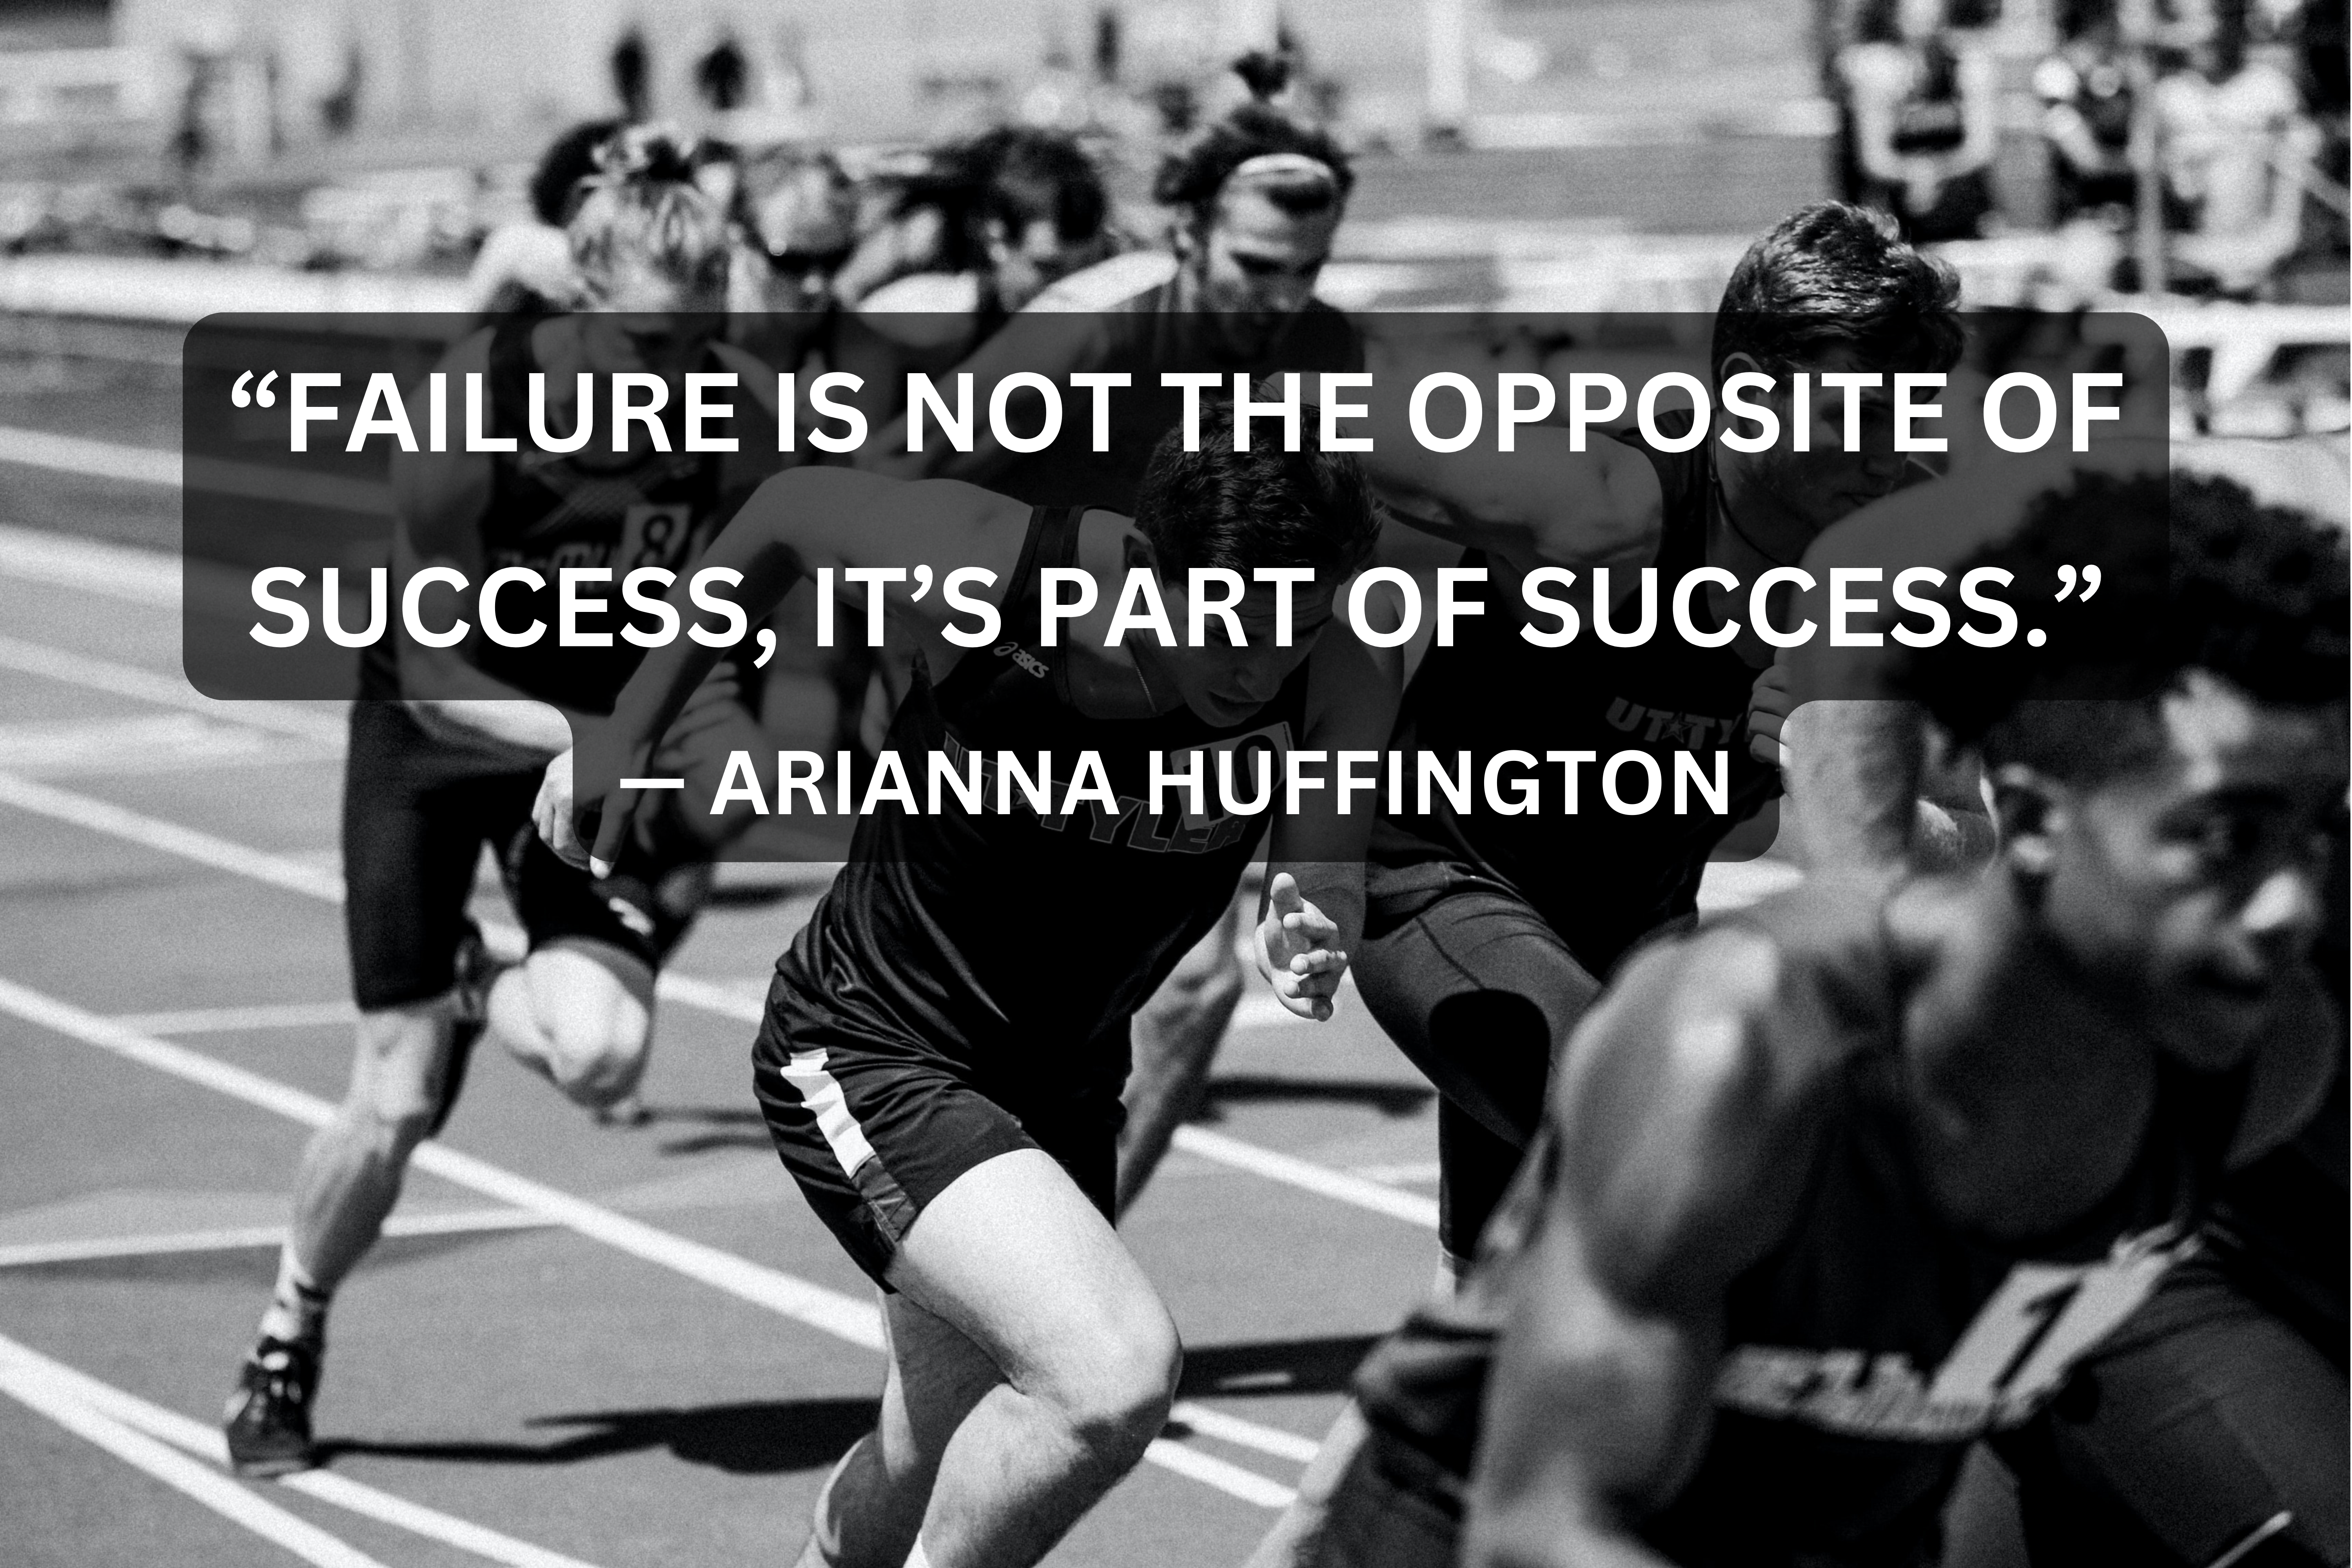 Failure is not the opposite of success it’s part of success - Hope and Belief.